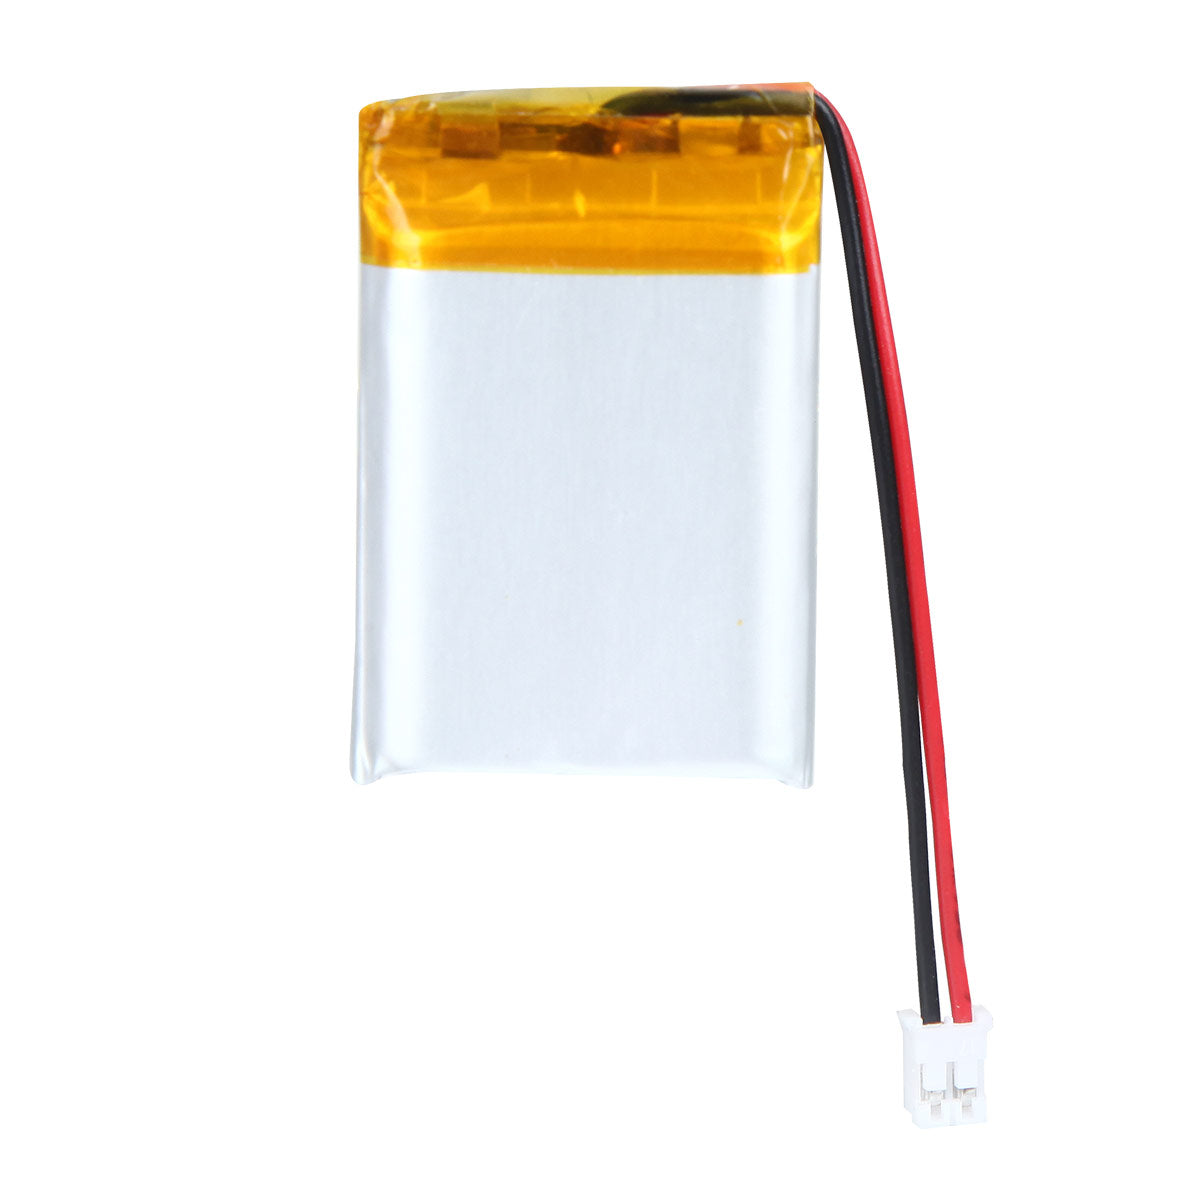 YDL 3.7V 500mAh 602535 Rechargeable Lithium Polymer Battery Length 37mm